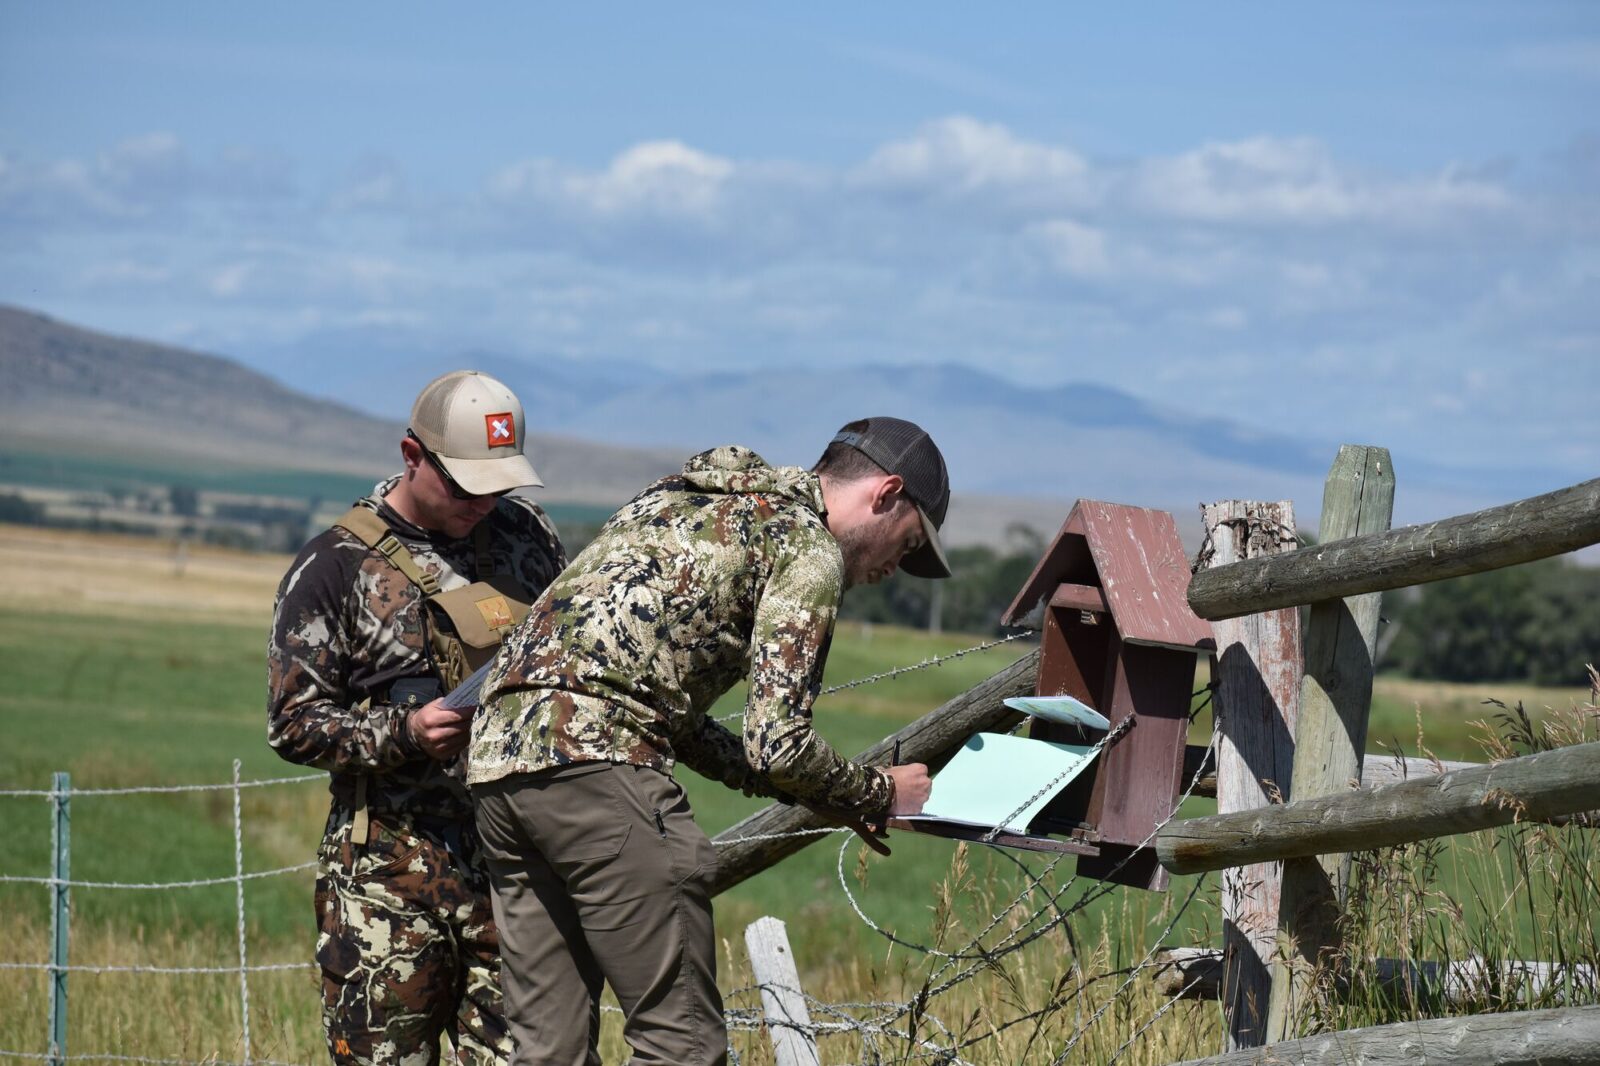 two hunters at a "walk-in" hunting program sign-in where they are signing their names so they can enter the private land that the owner is allowing them to hunt on.